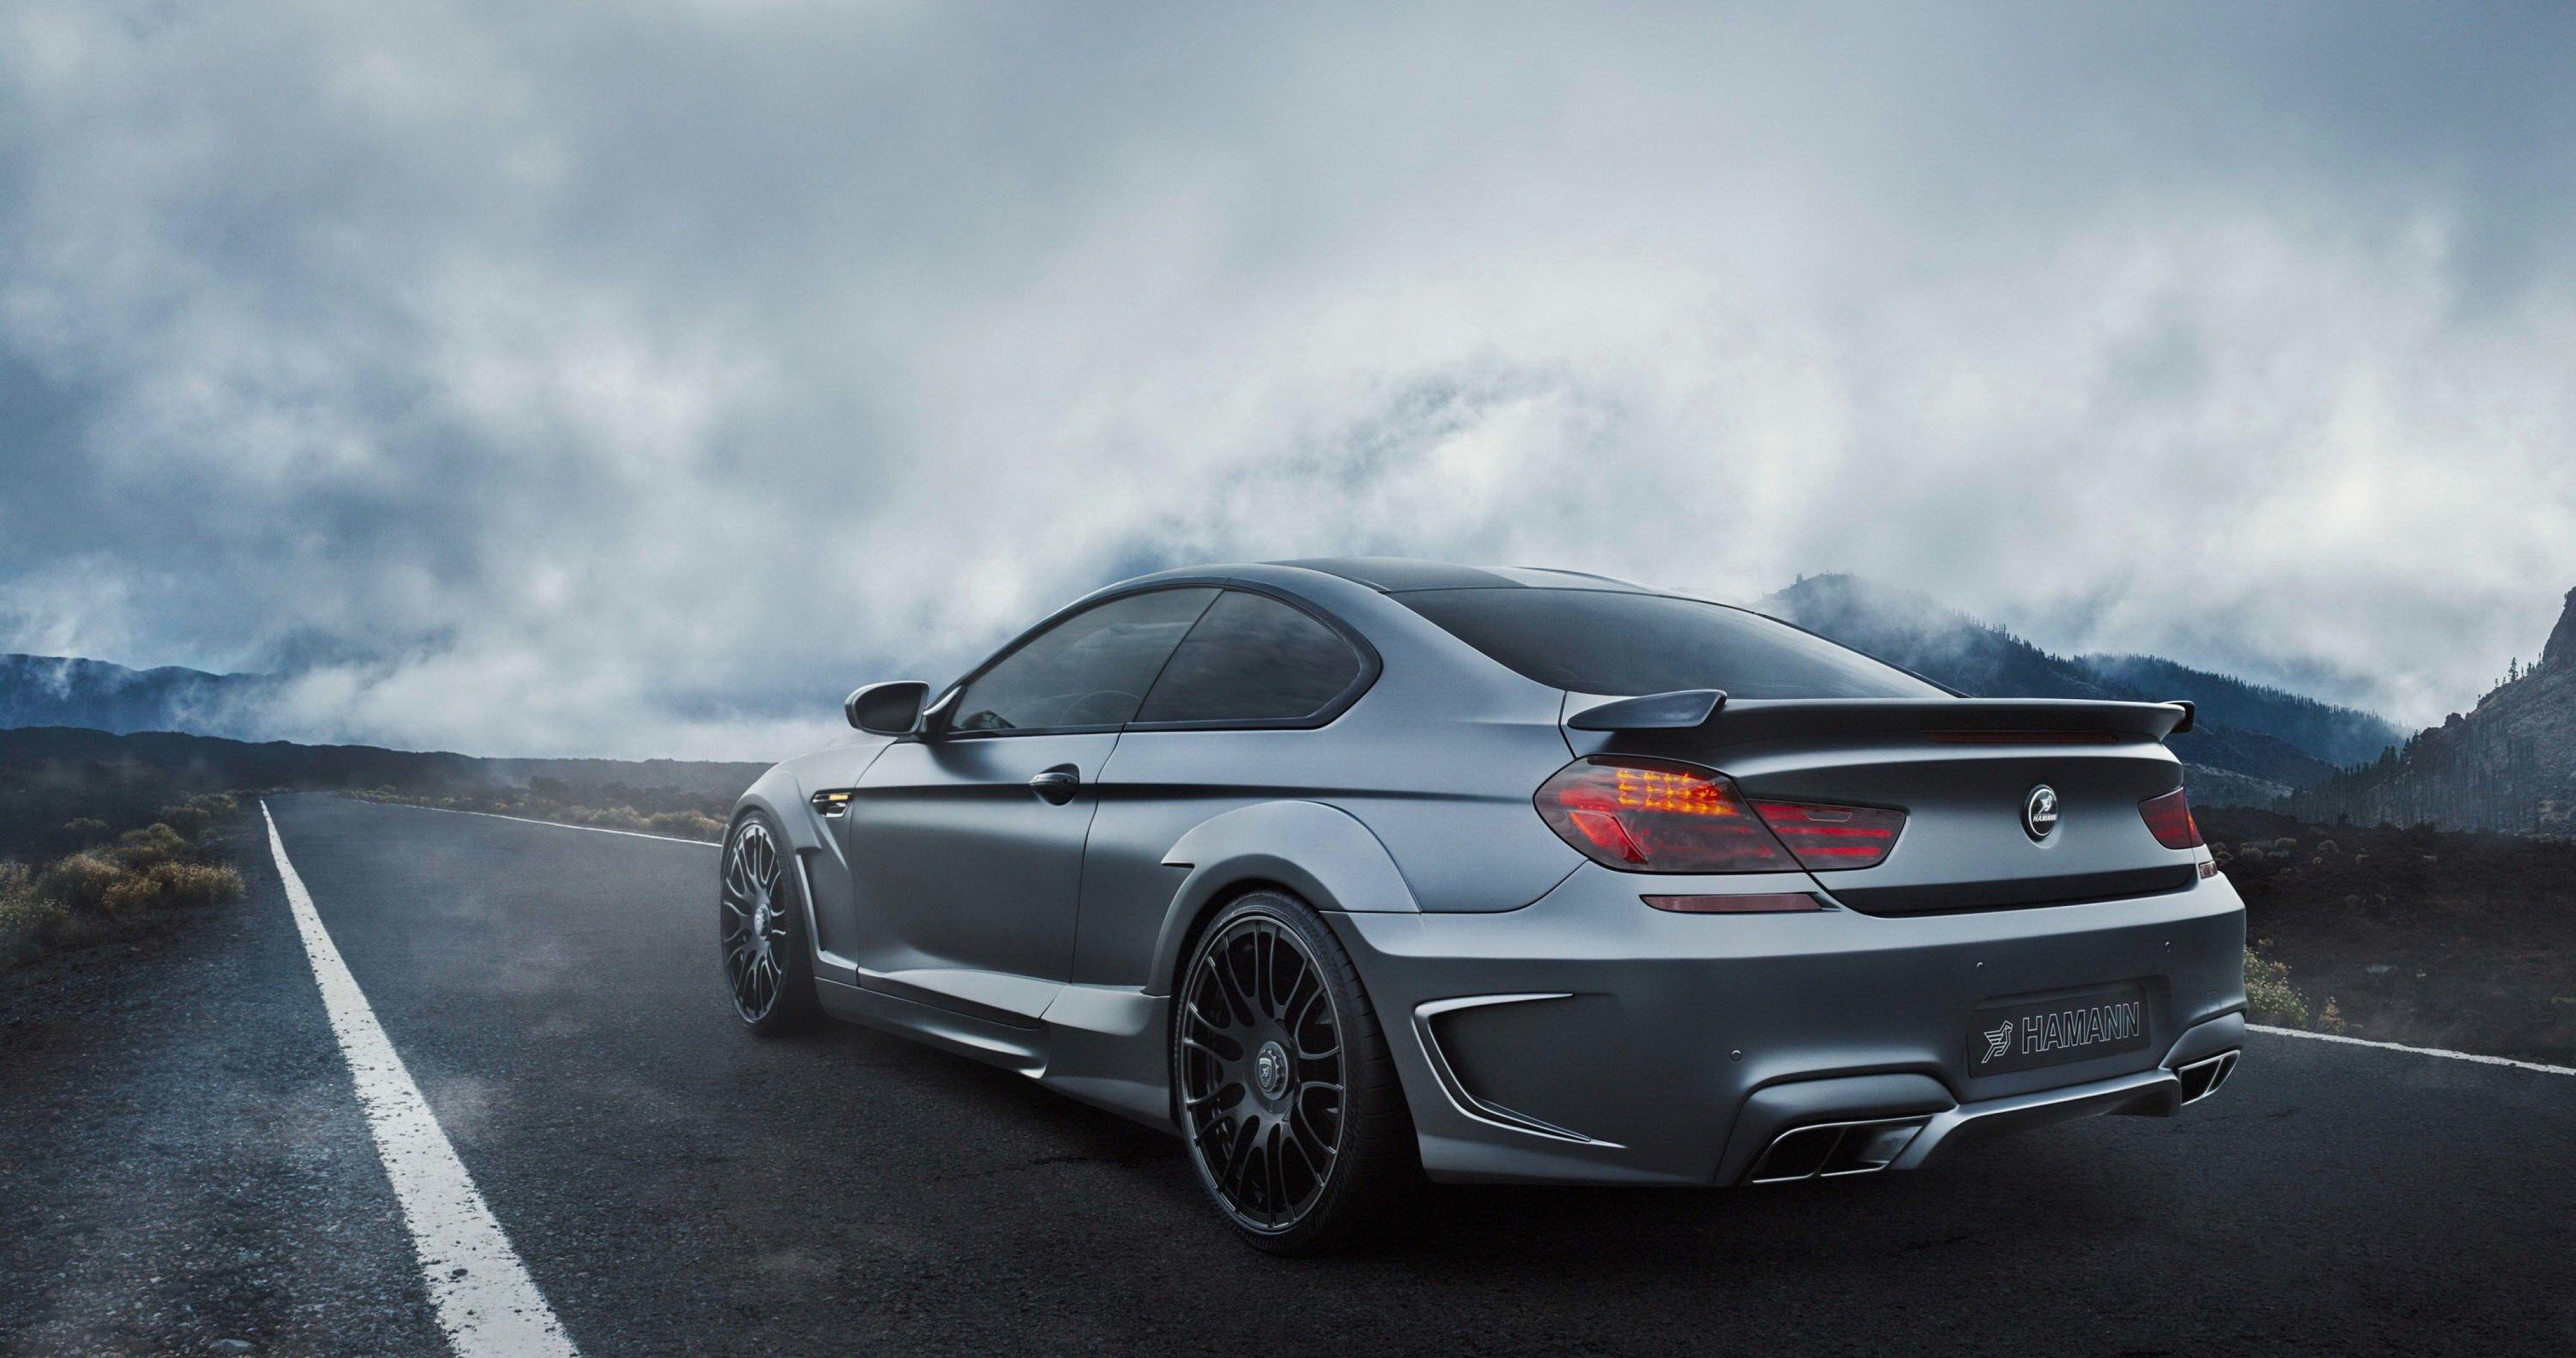 Bmw M6 Wallpapers Top Free Bmw M6 Backgrounds Wallpaperaccess